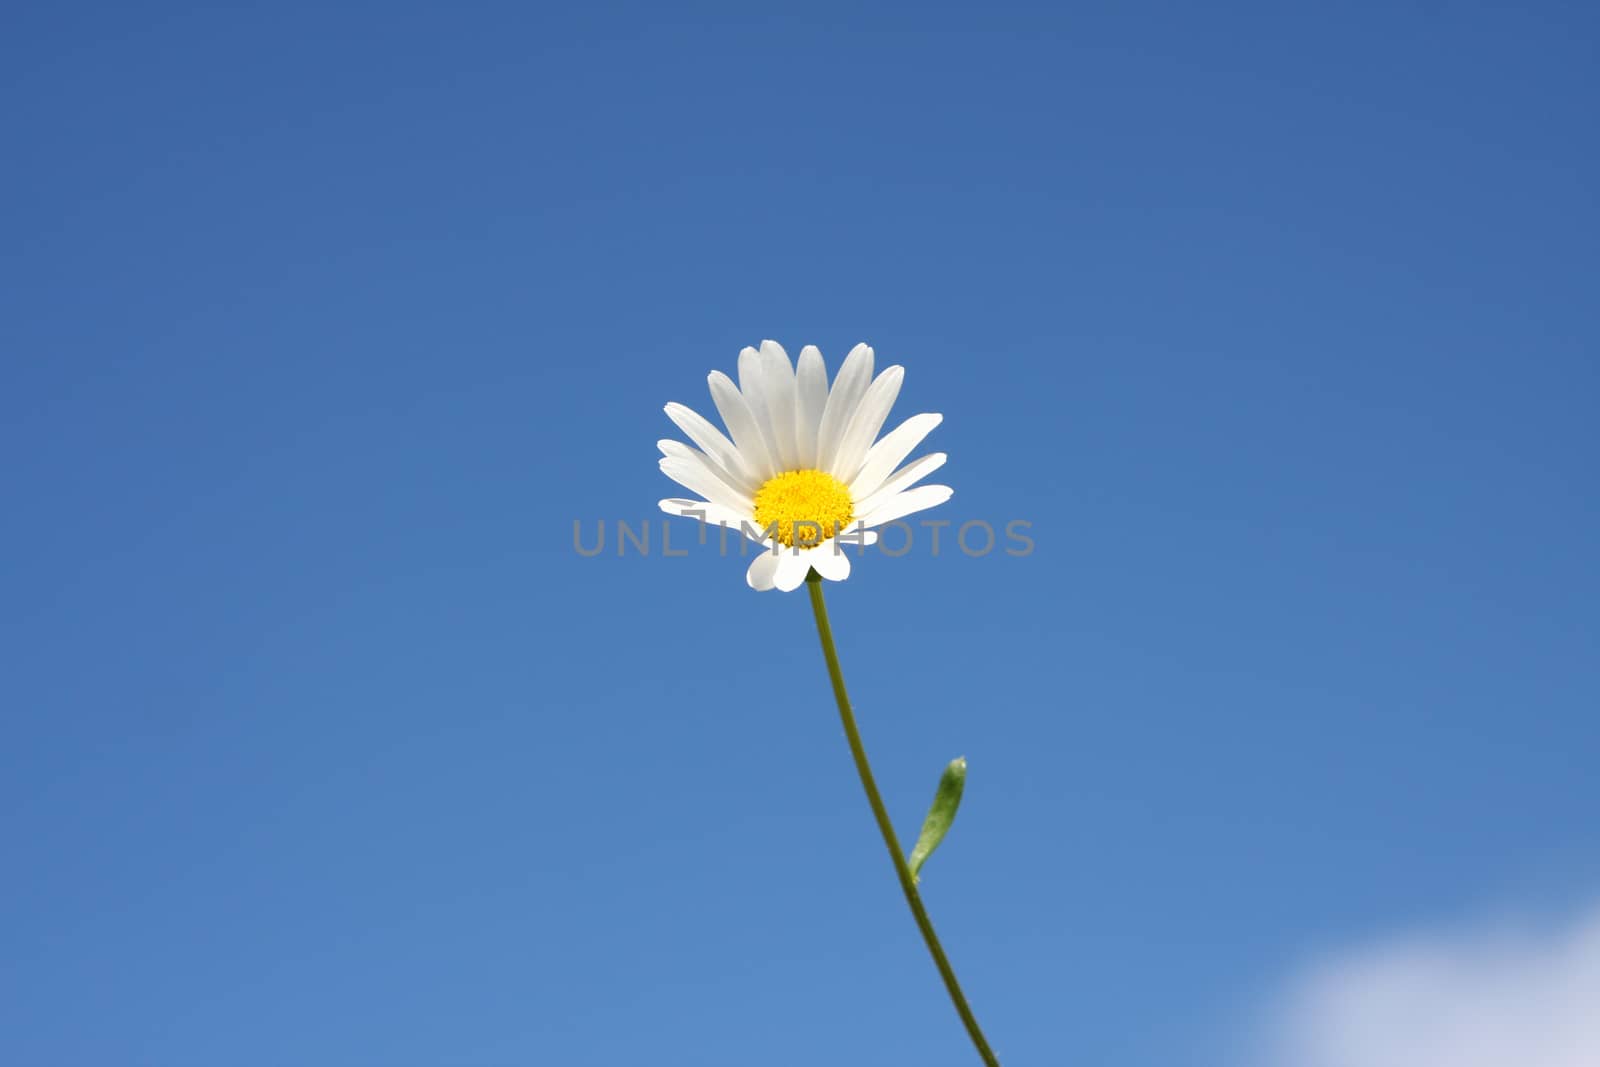 An image of a marguerite flower and the blue sky background